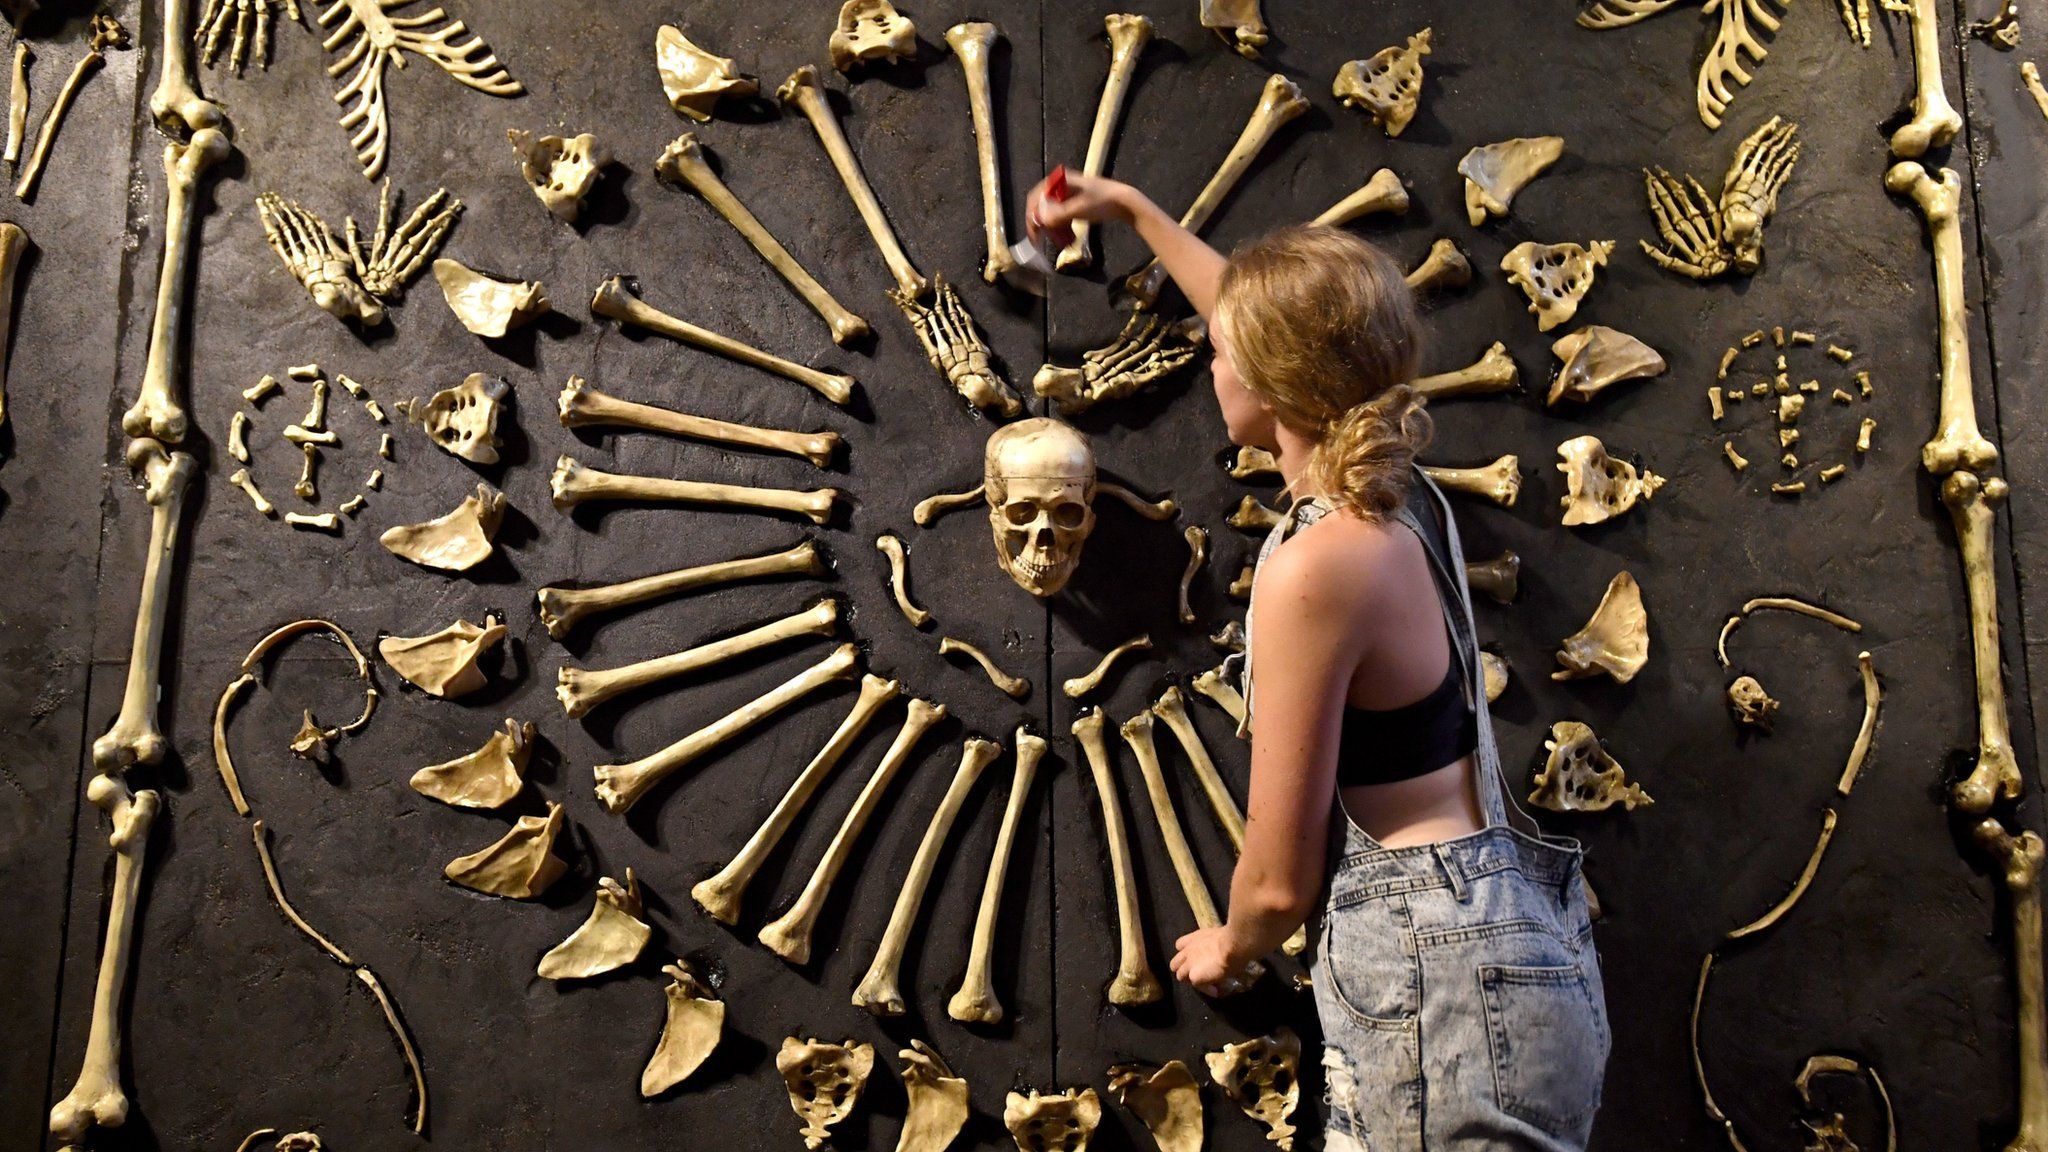 A attendant cleans an exhibit from "Real Bodies: The Exhibition"arter, Moore Park in Sydney, 12 April 2018